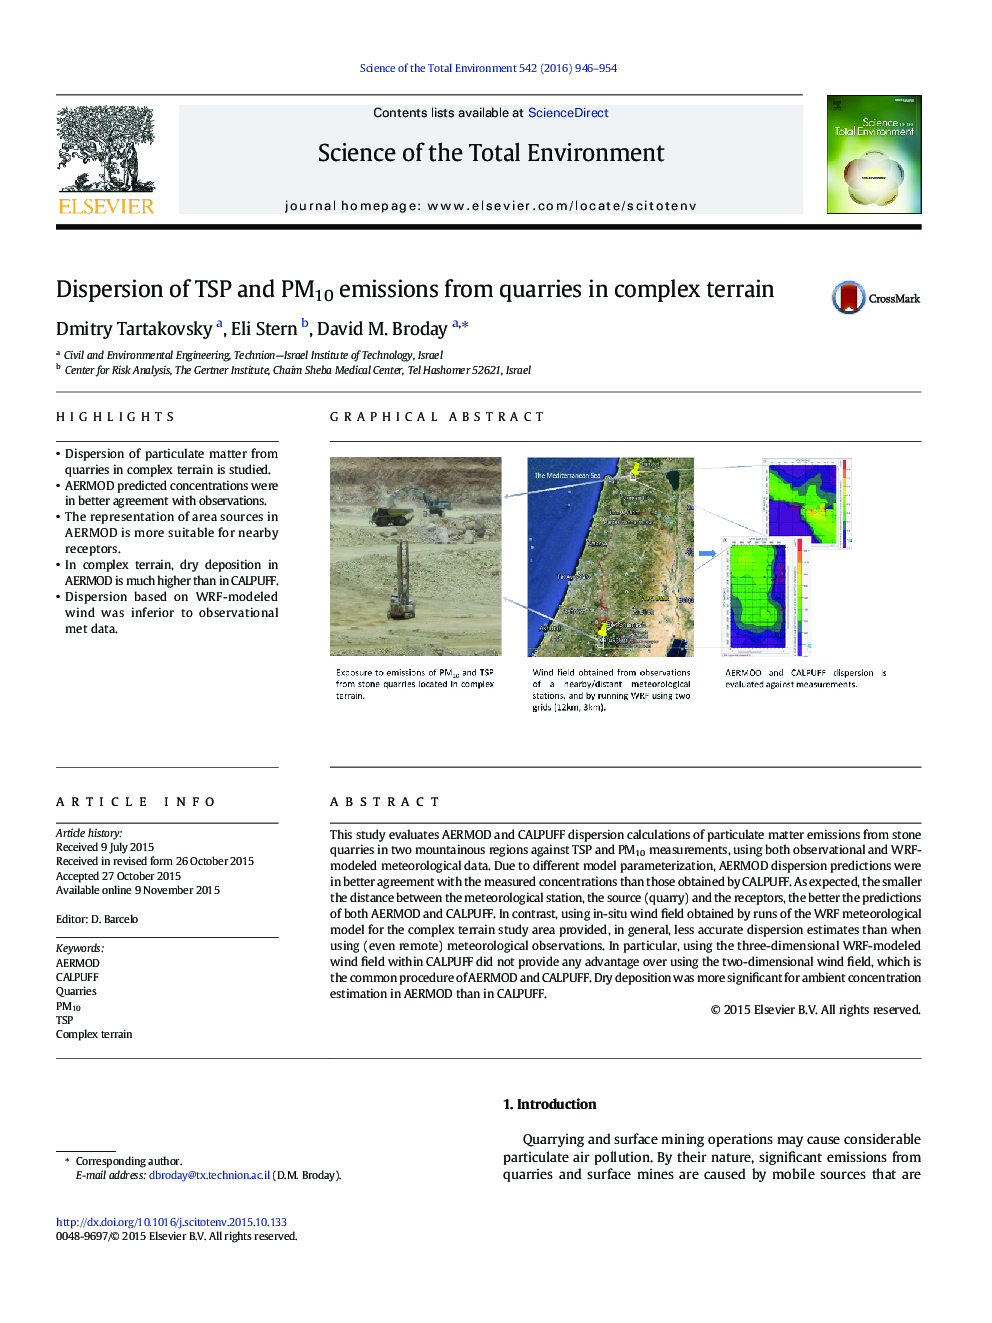 Dispersion of TSP and PM10 emissions from quarries in complex terrain